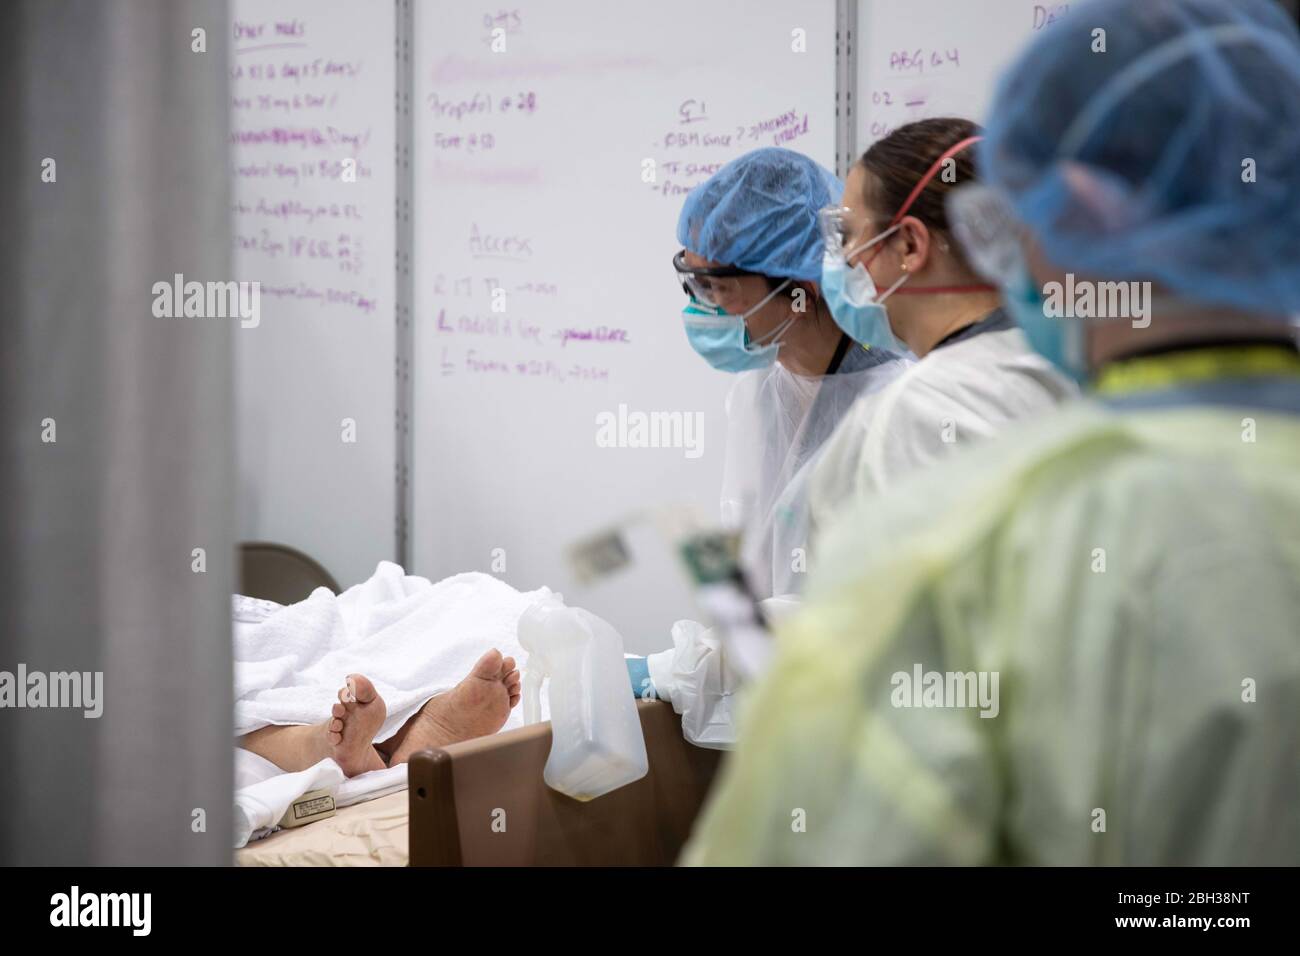 U.S. Army service members, deployed from Fort Campbell, Kentucky, perform patient care in the Intensive Care Unit at the Javits New York Medical Station at the Jacob K. Javits Convention Center in New York City, in support of the Department of Defense COVID-19 response. Stock Photo